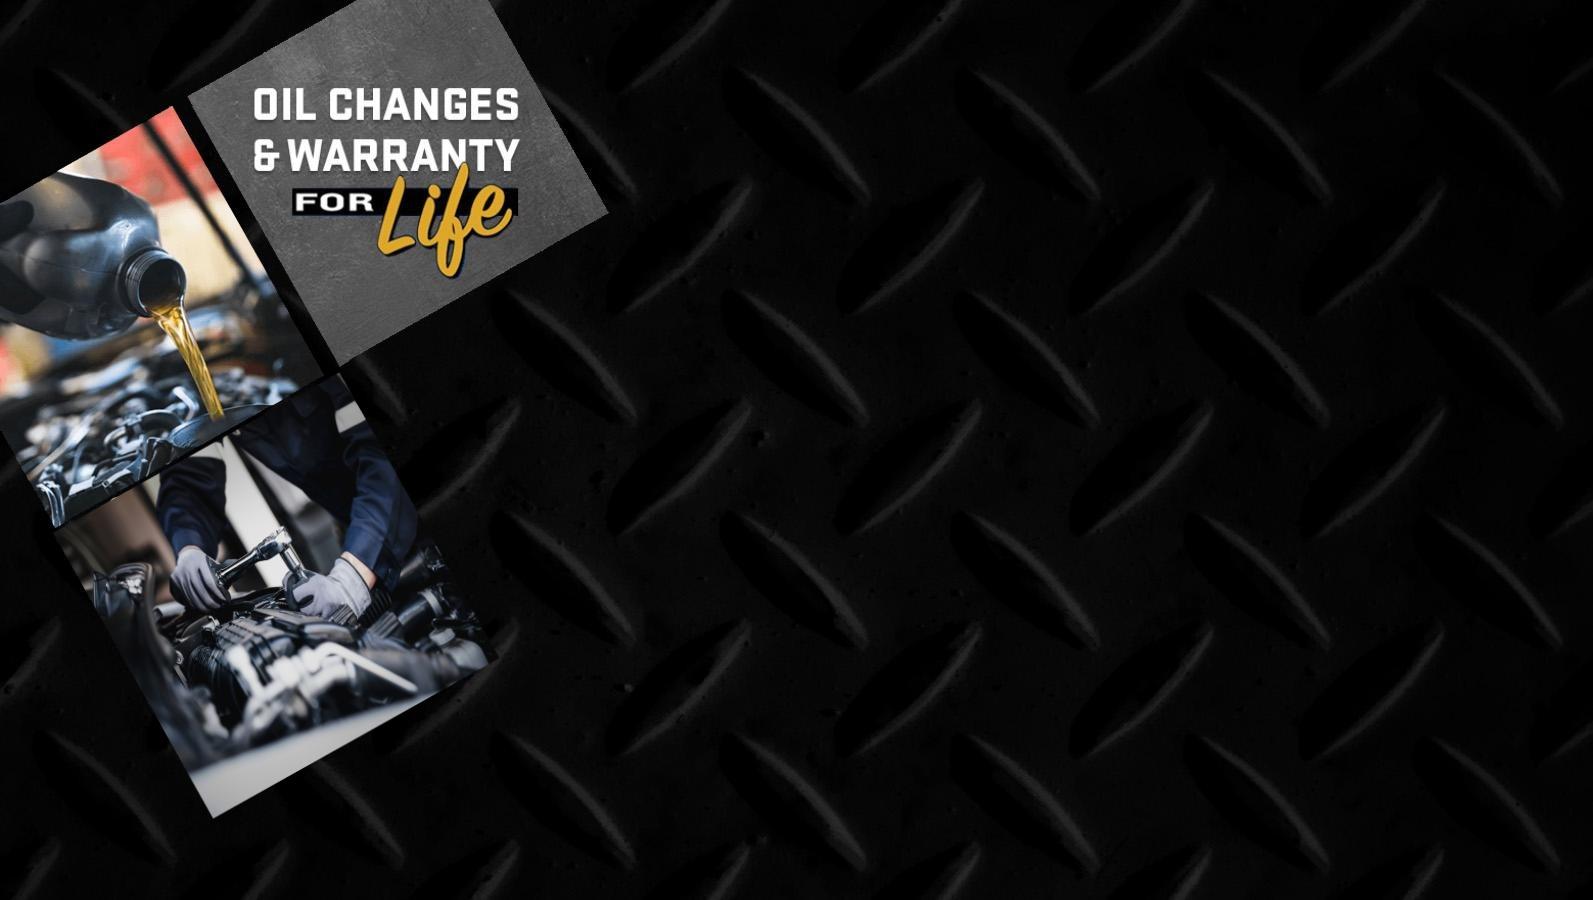 Oil Changes for Life - Learn More